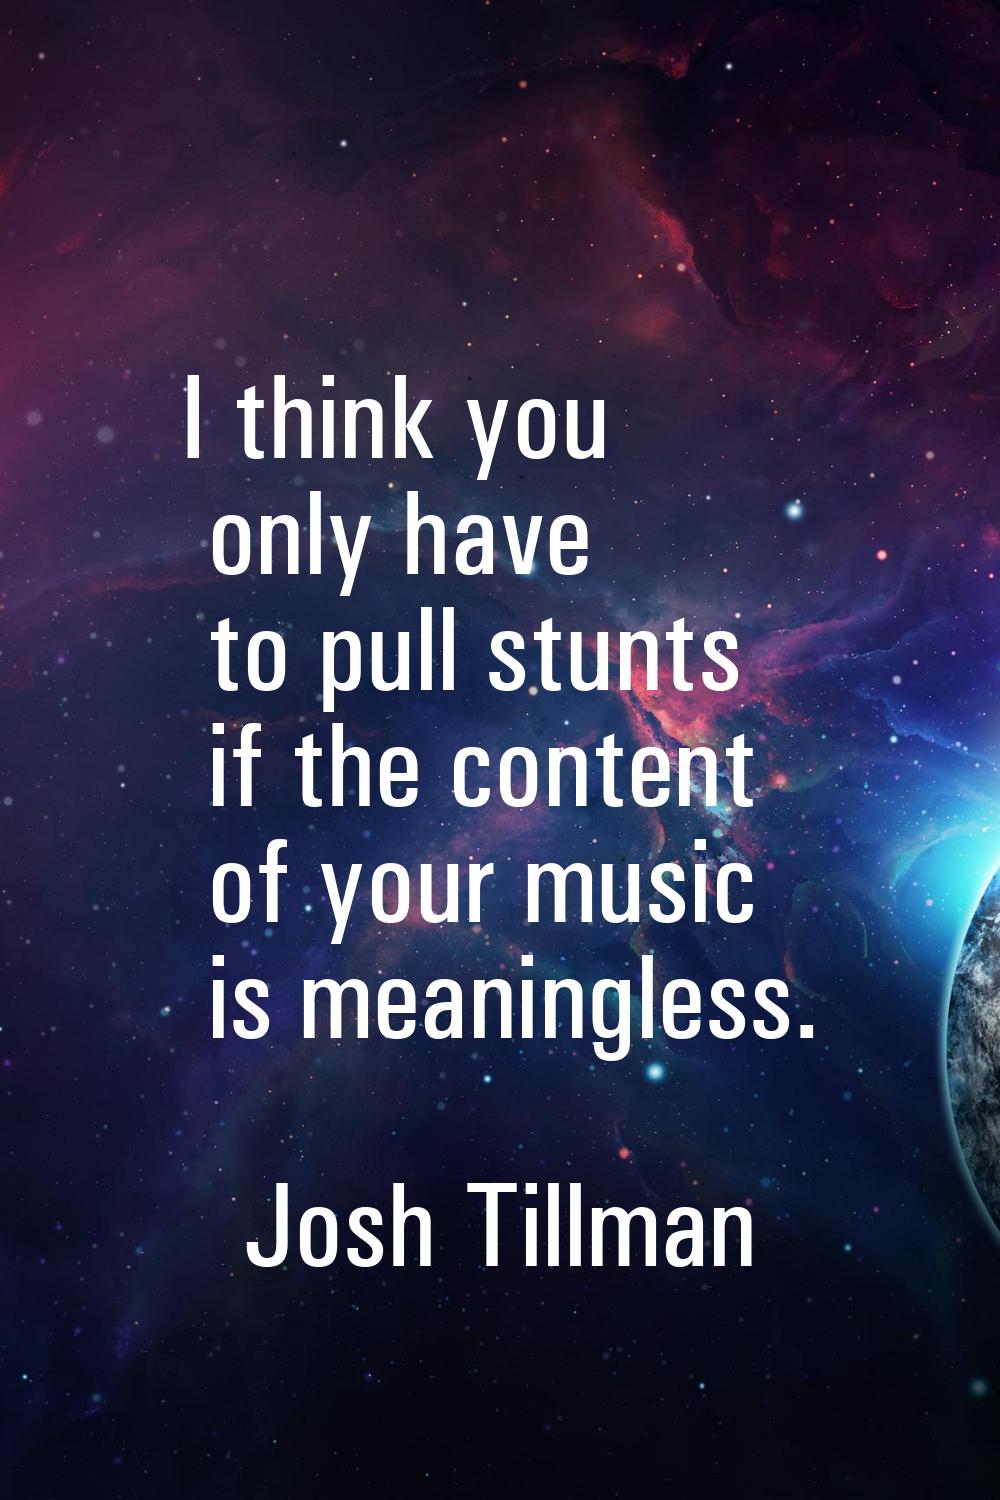 I think you only have to pull stunts if the content of your music is meaningless.